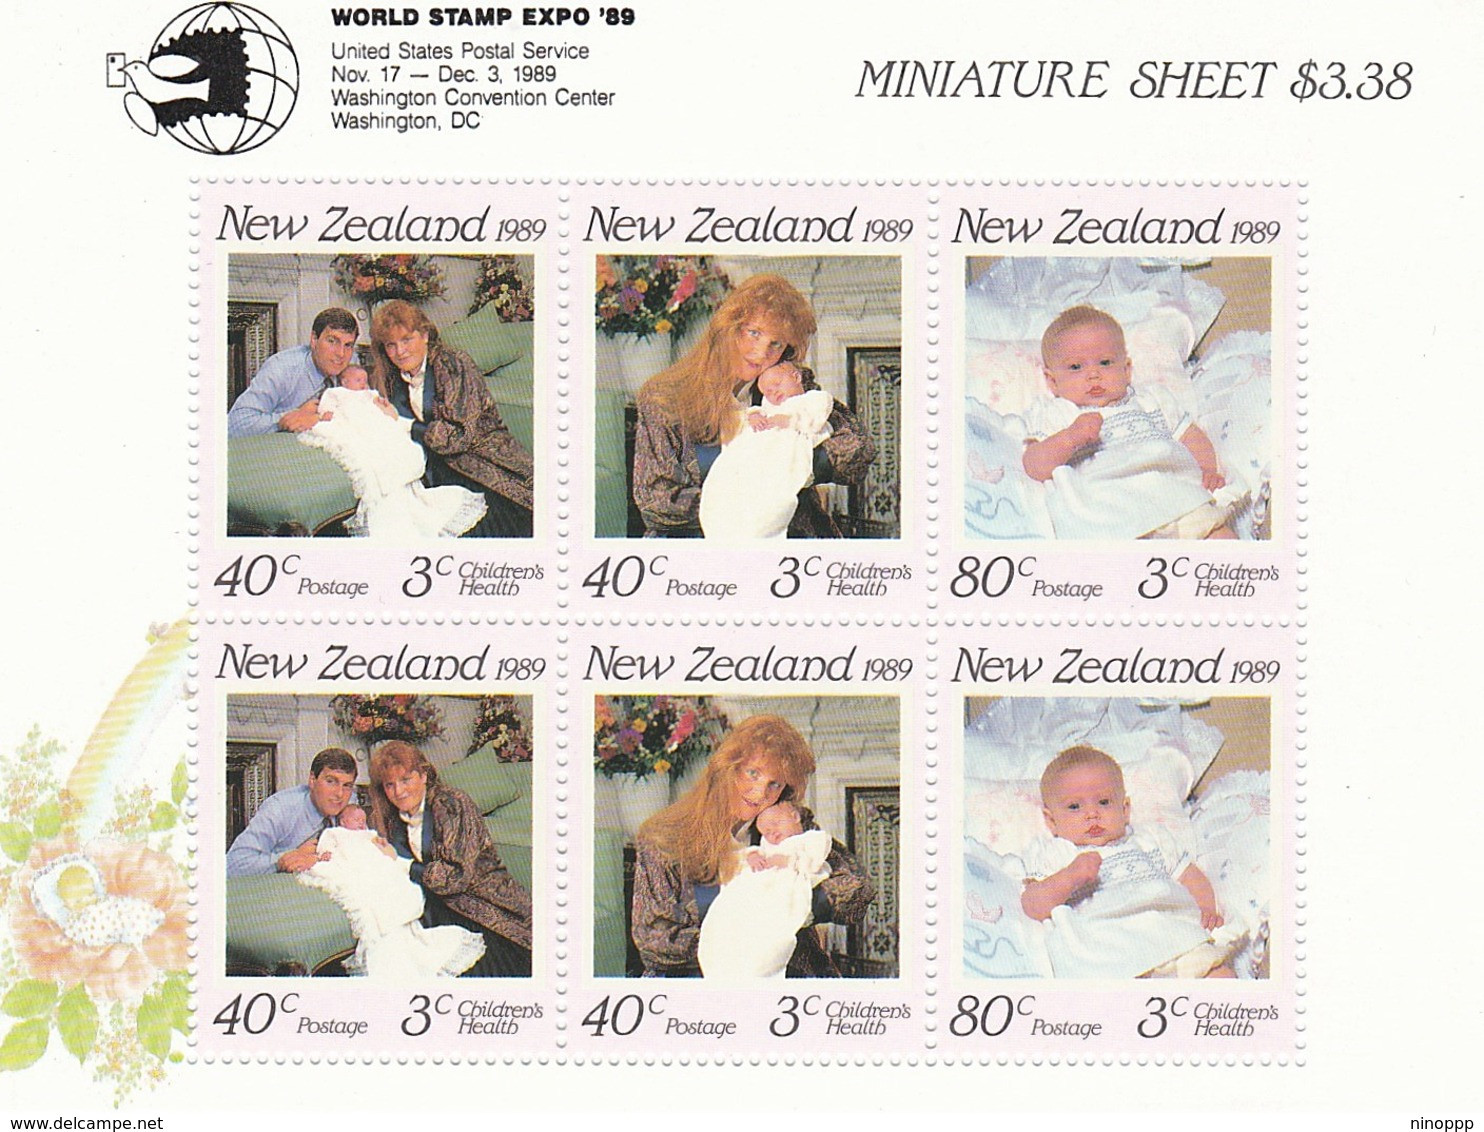 New Zealand SG MS 1519a 1989 Royal Family Health, Miniature Sheet,Overprinted World Expo'89, Mint Never Hinged - Ungebraucht